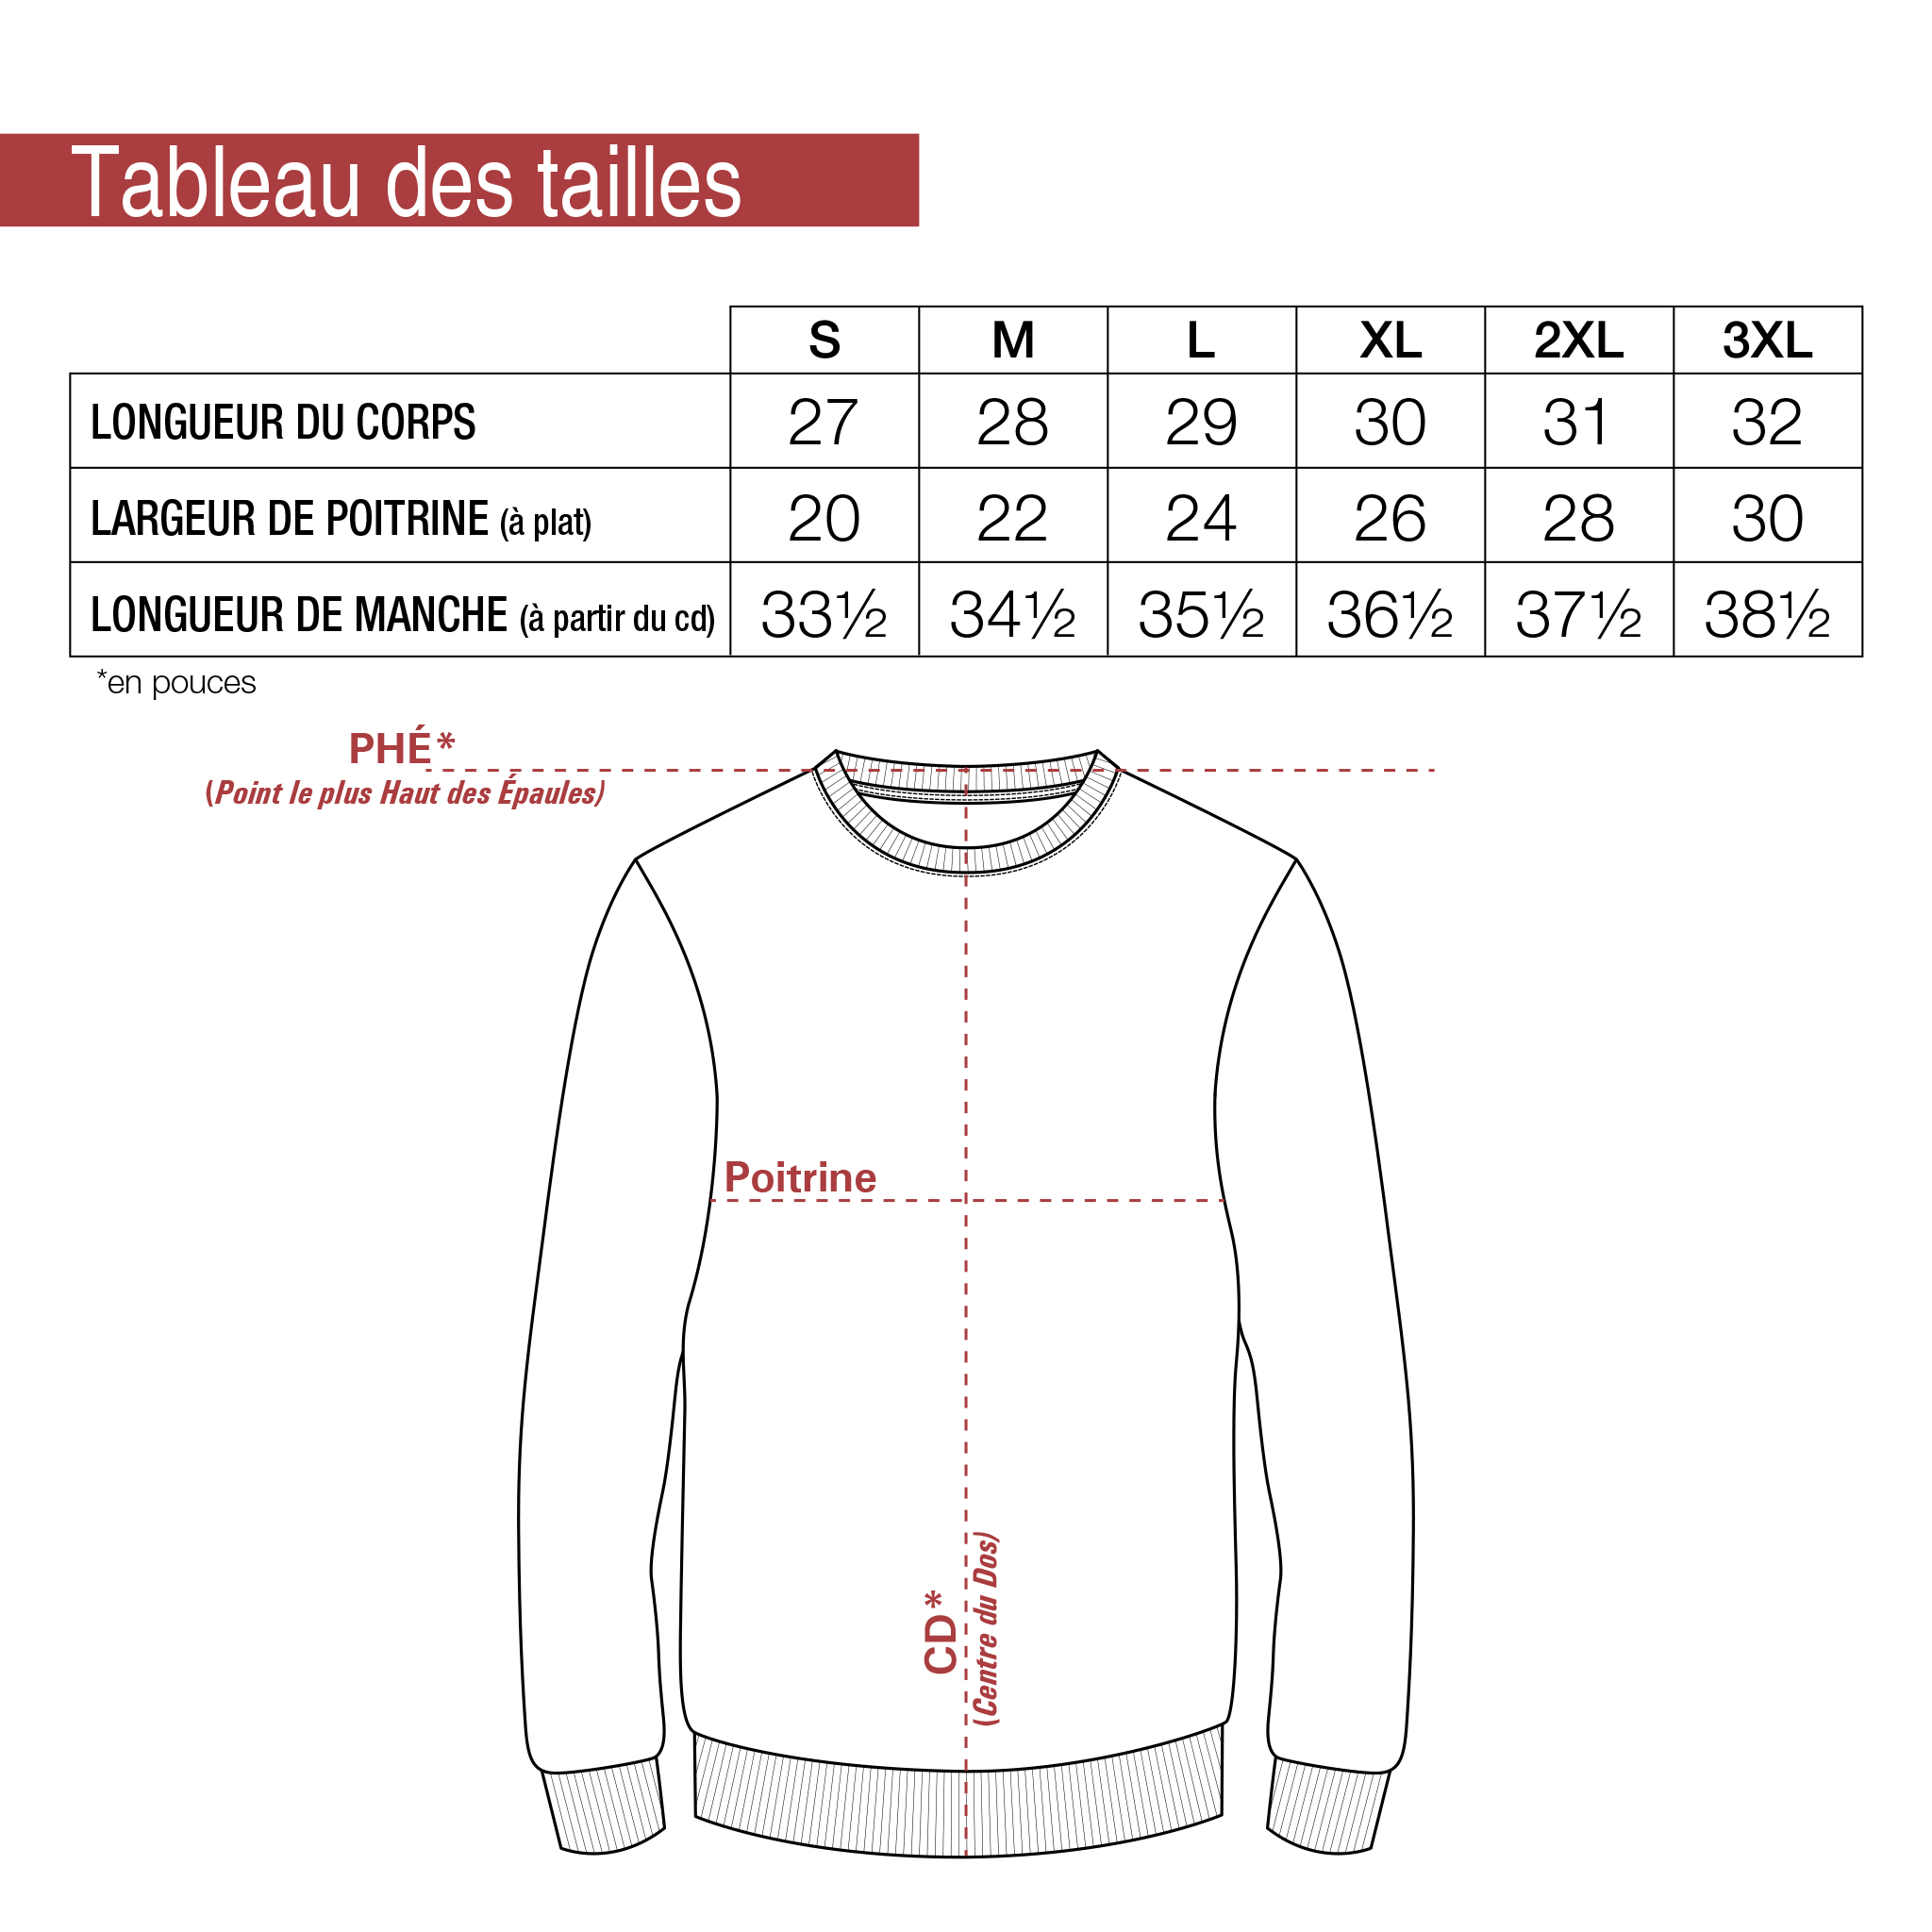 Tableau-taille-18000_517cb411-7fac-4ef9-ae92-c18ea69e2349.png